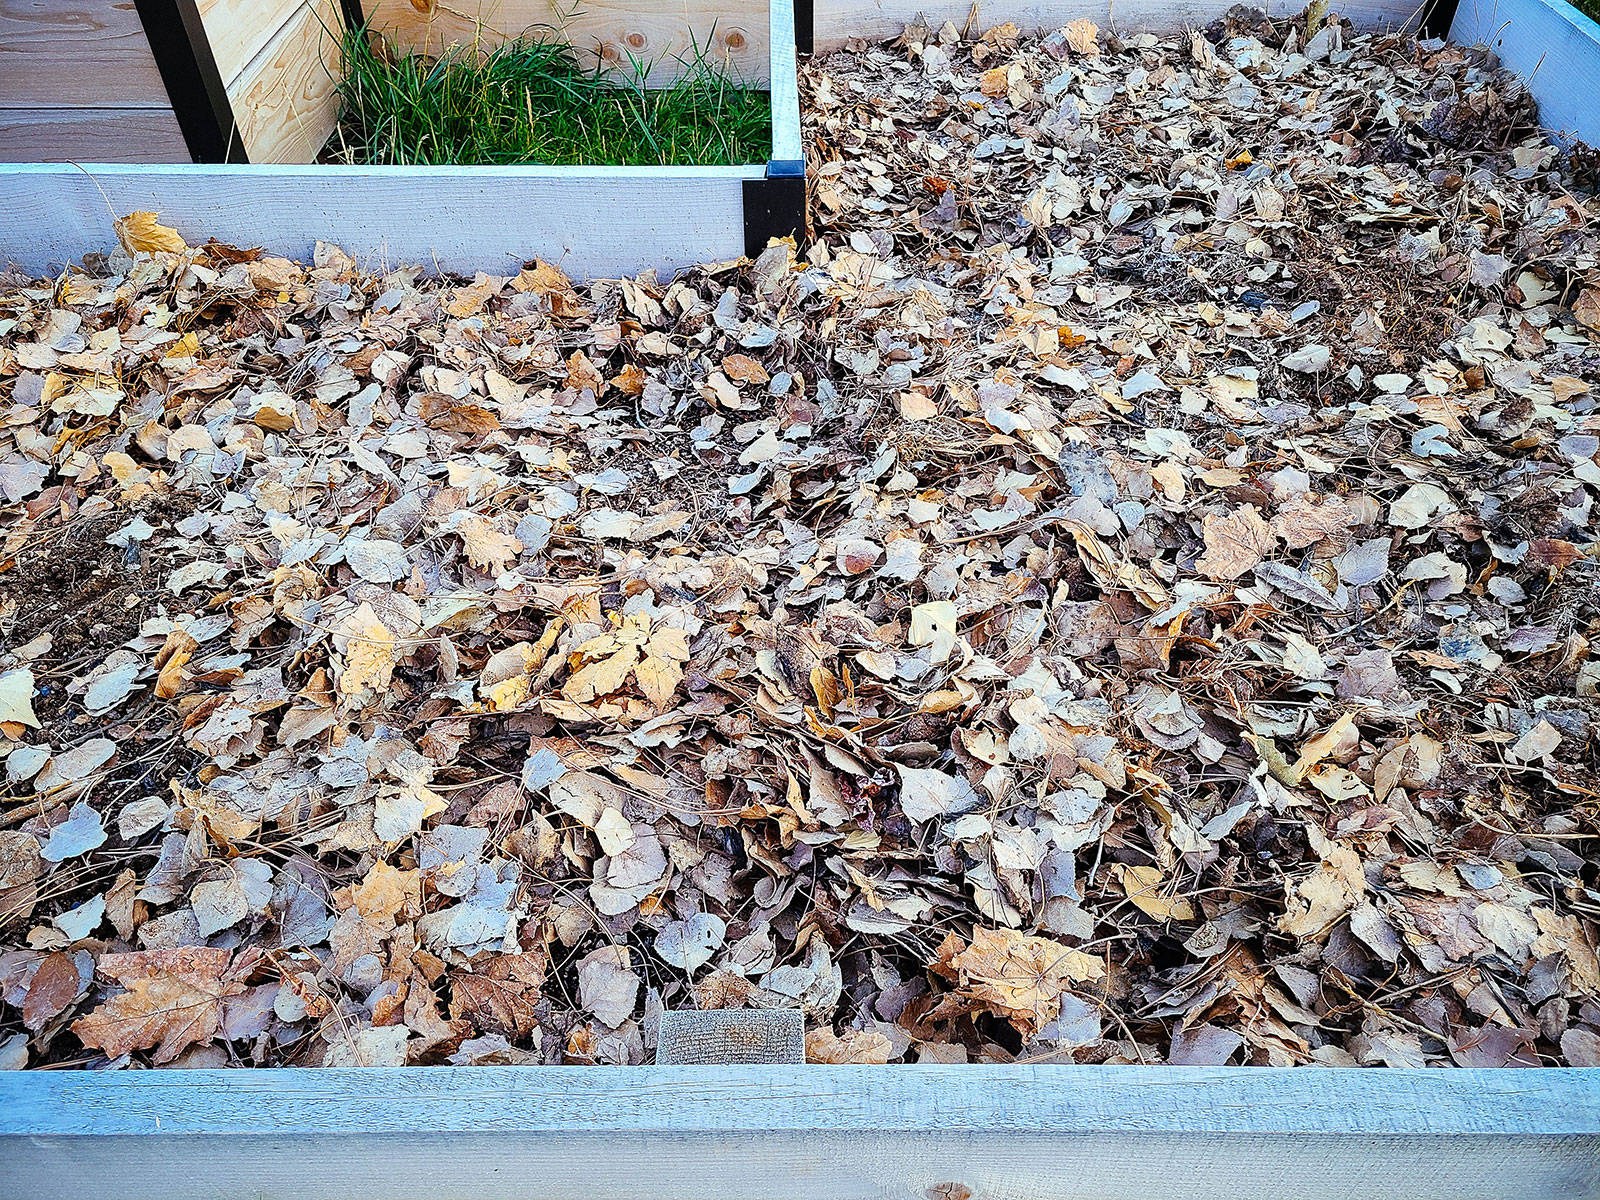 Fallen leaves used as mulch in a raised bed